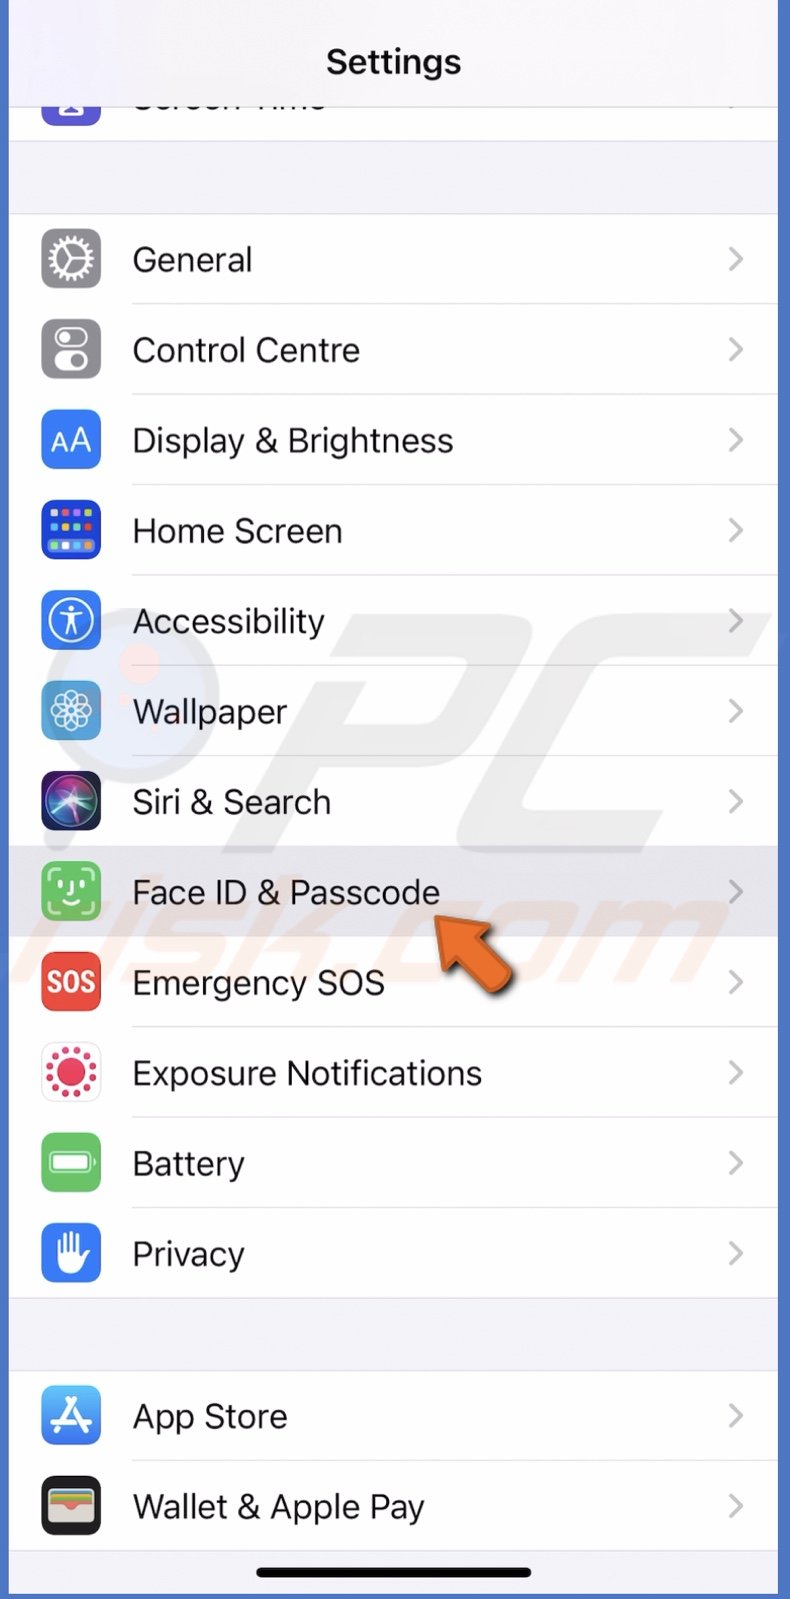 Go to Face ID & Passcode